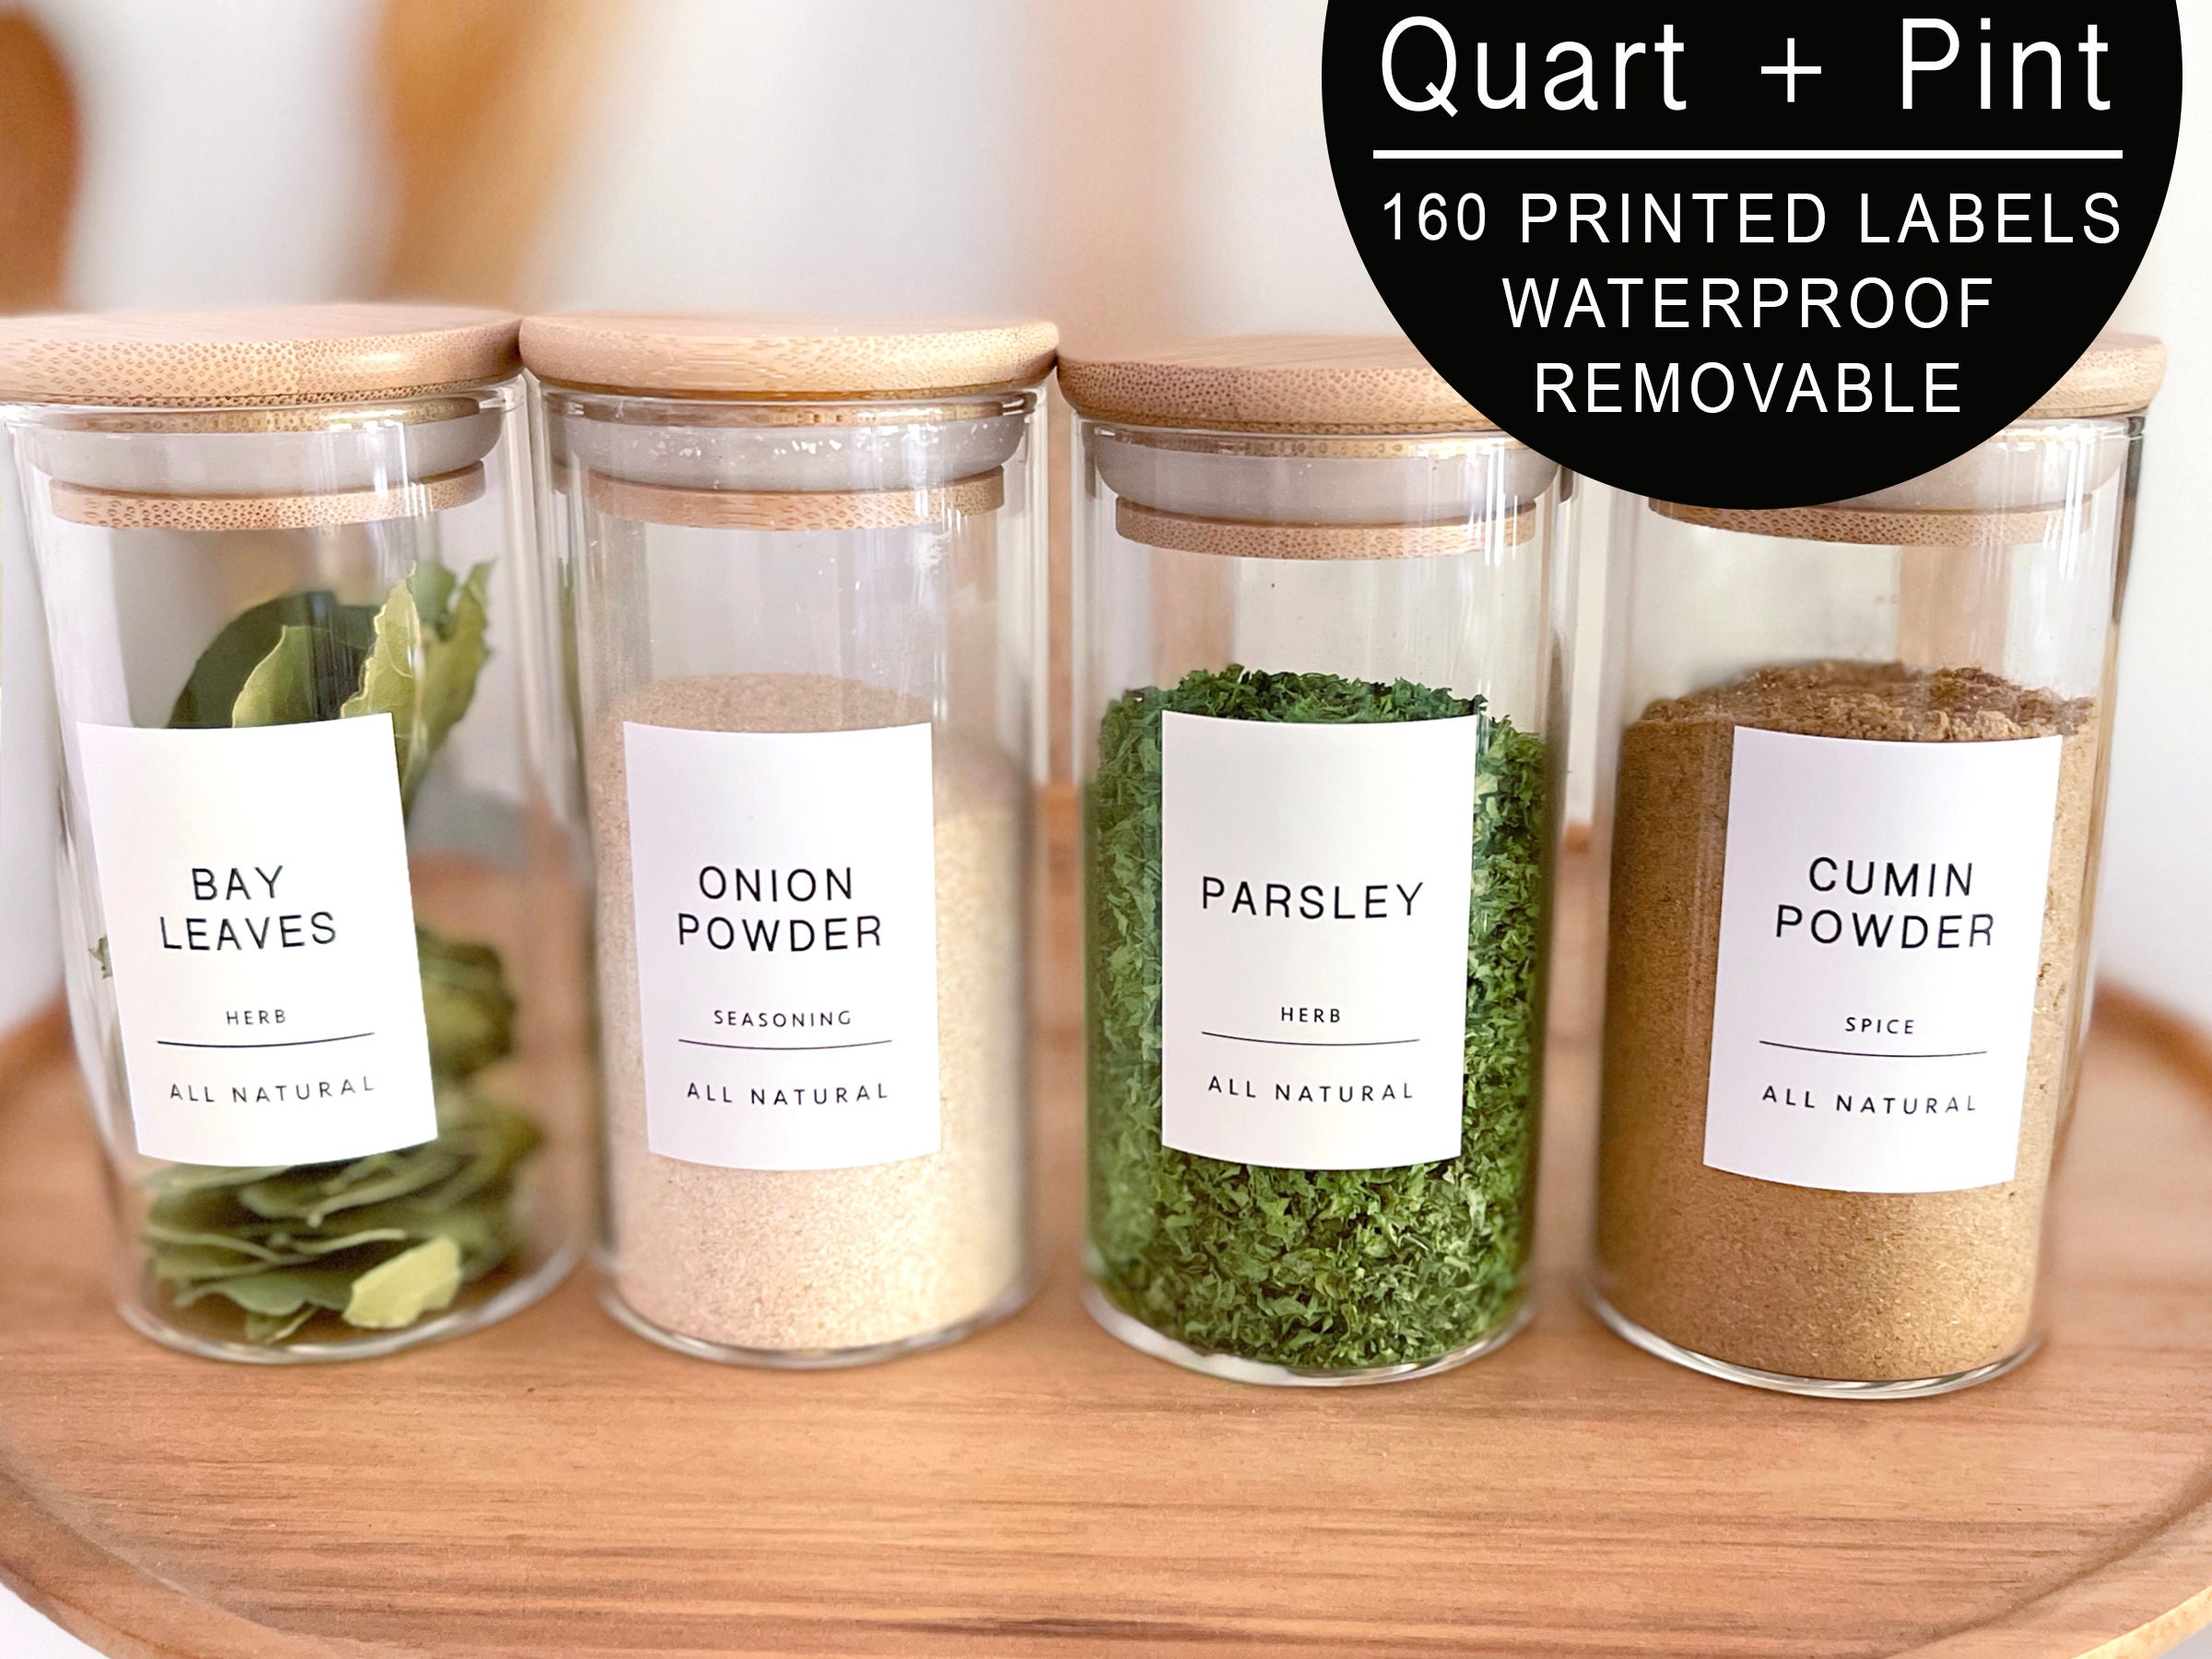 How to Organize Your Spice Jars With Labels! - South House Designs